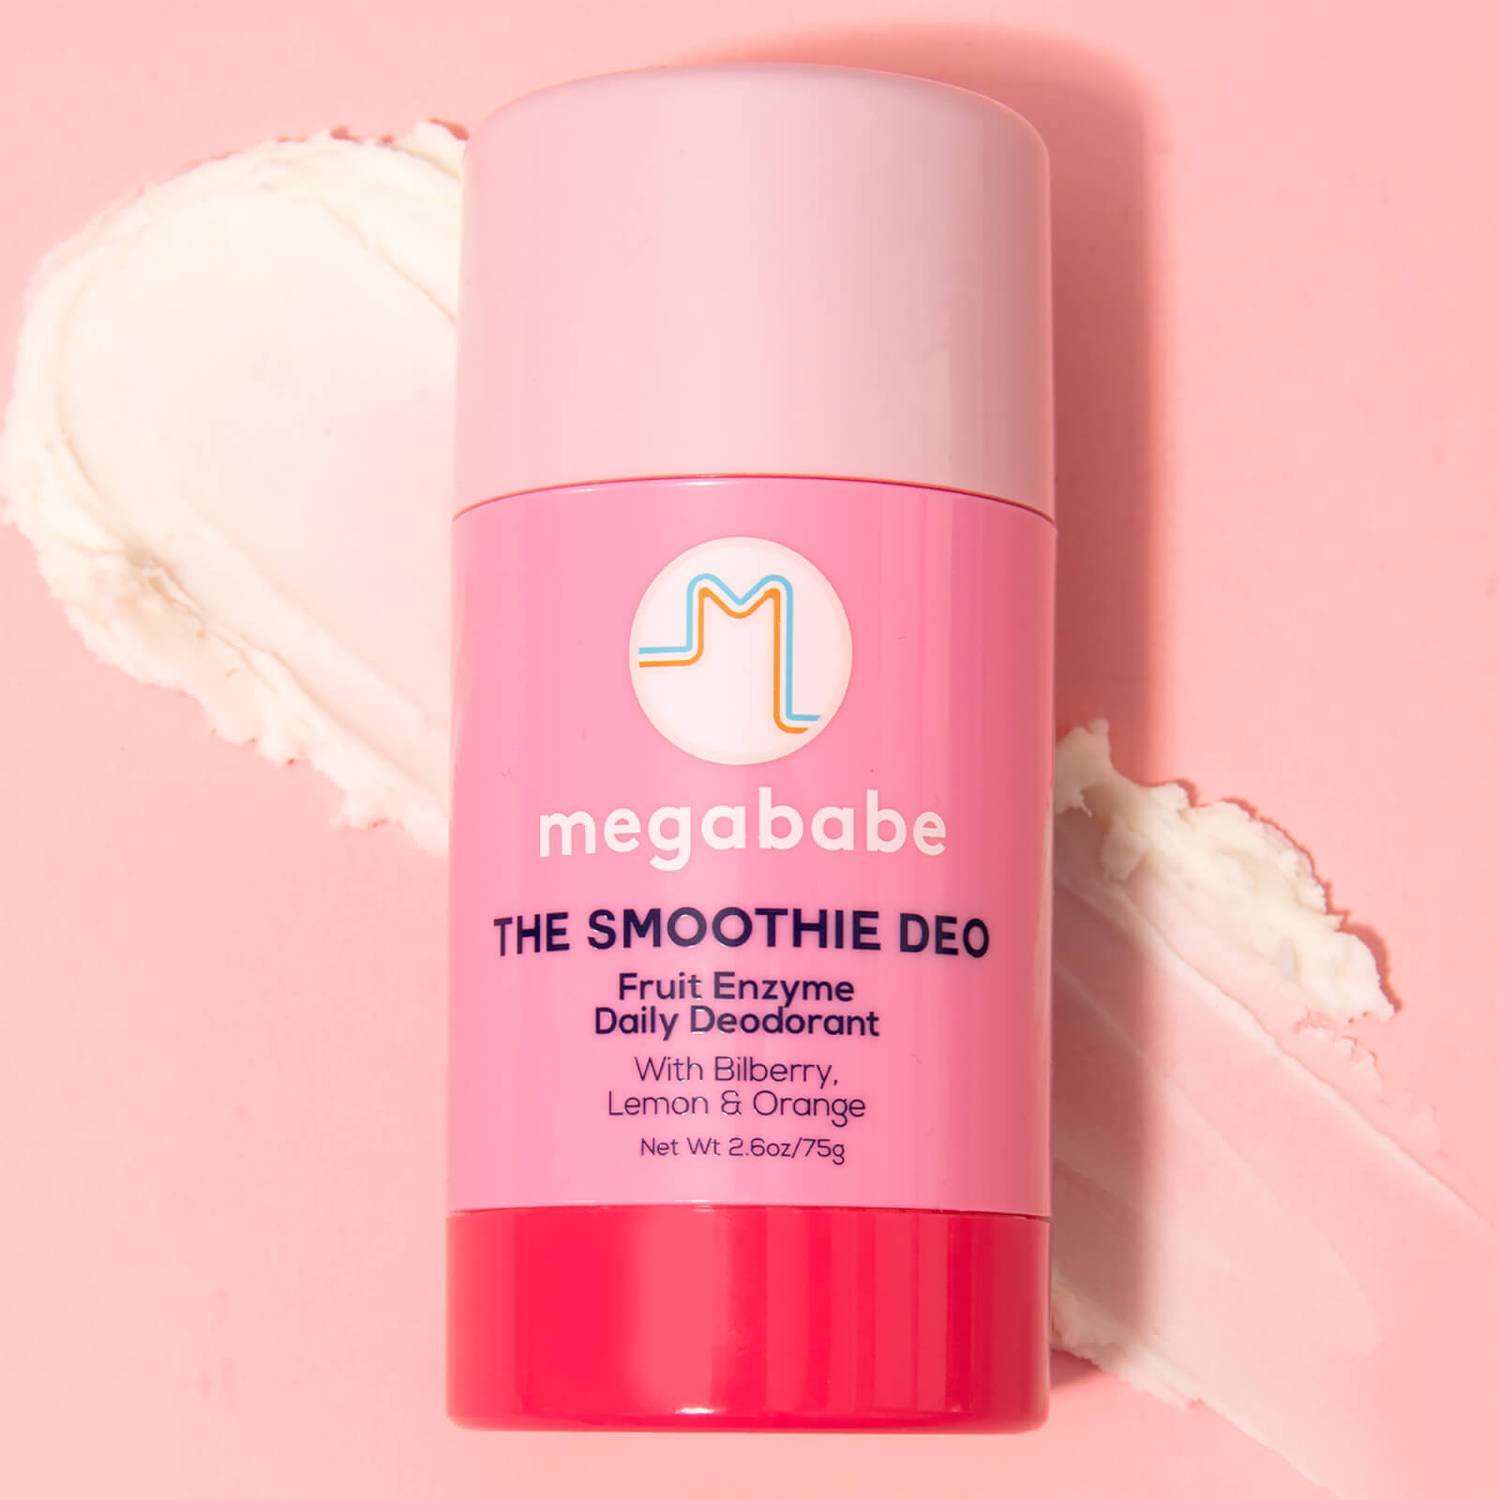 Megababe The Smoothie Deo Fruit Enzyme Daily Deodorant